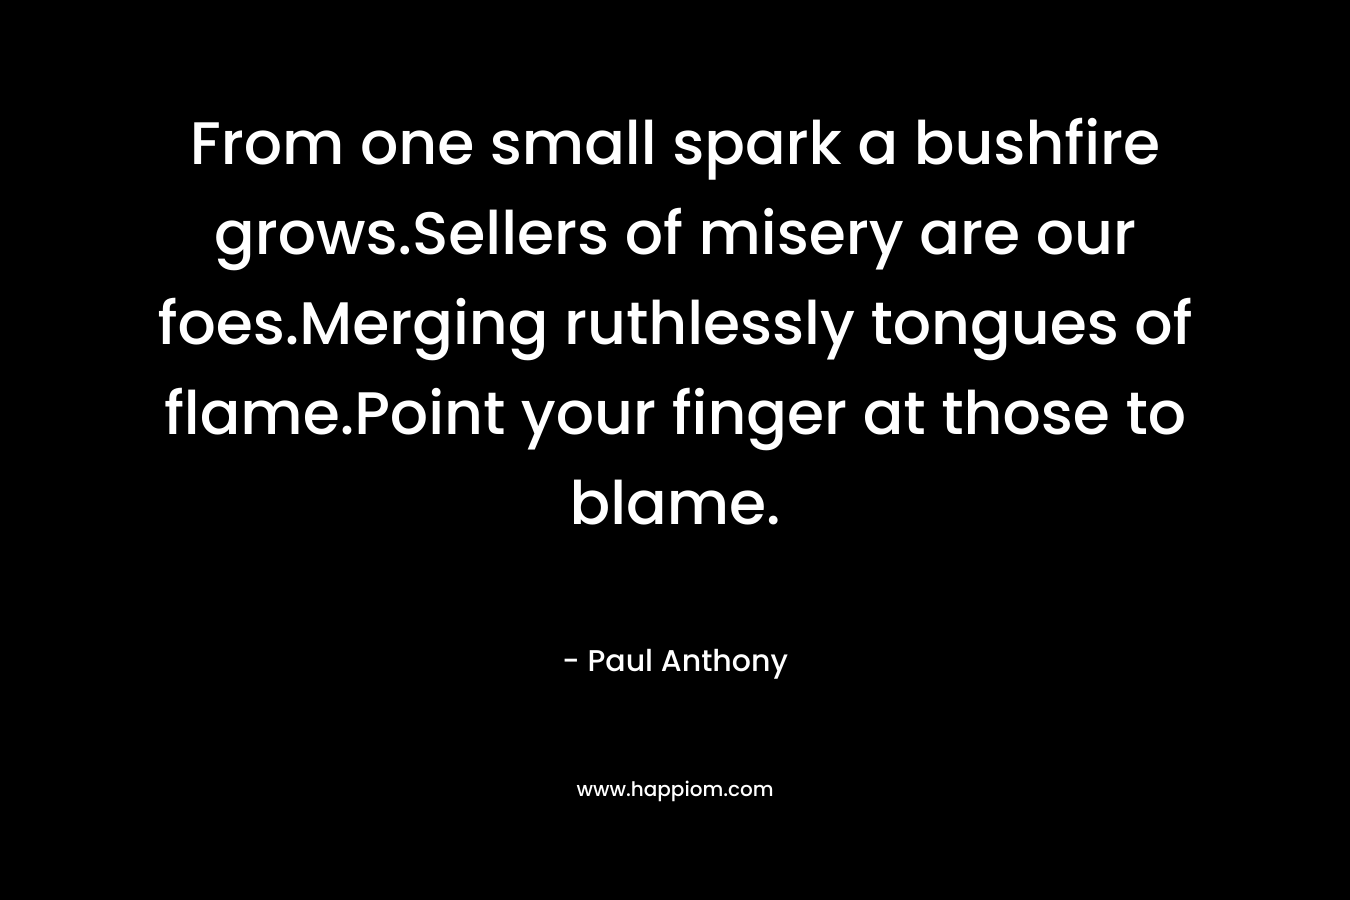 From one small spark a bushfire grows.Sellers of misery are our foes.Merging ruthlessly tongues of flame.Point your finger at those to blame.